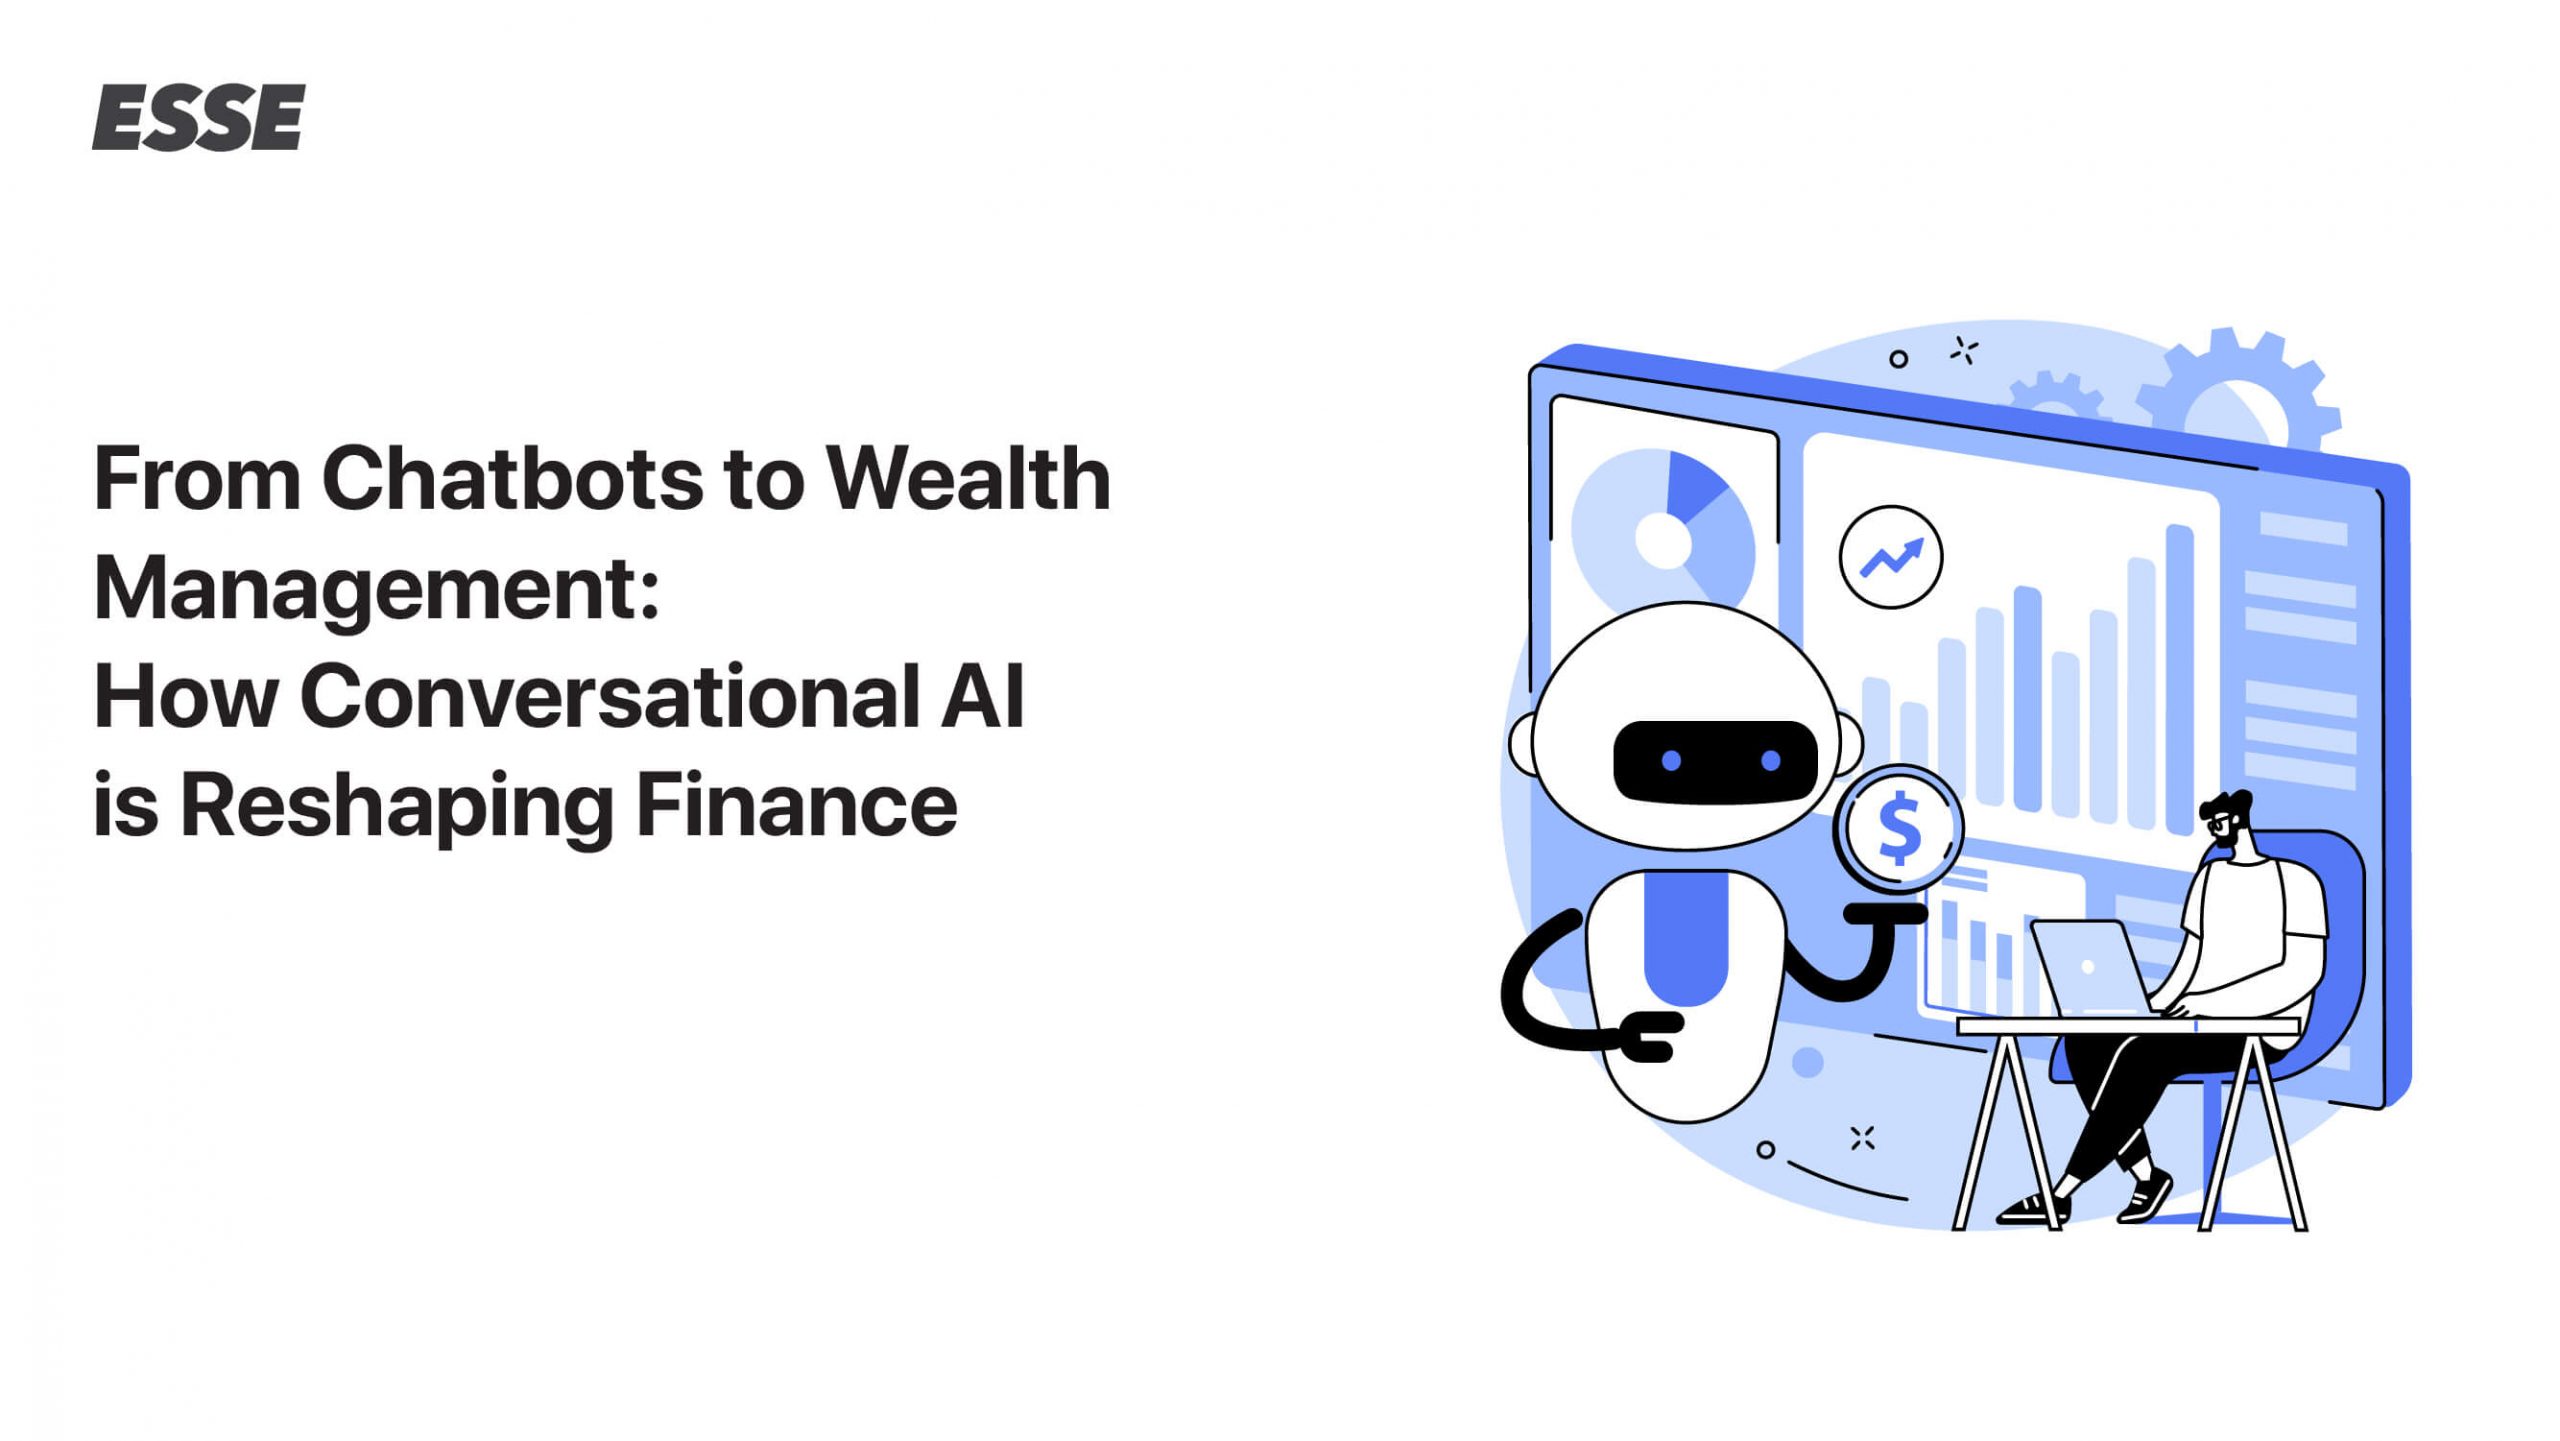 From Chatbots to Wealth Management: How Conversational AI is Reshaping Finance